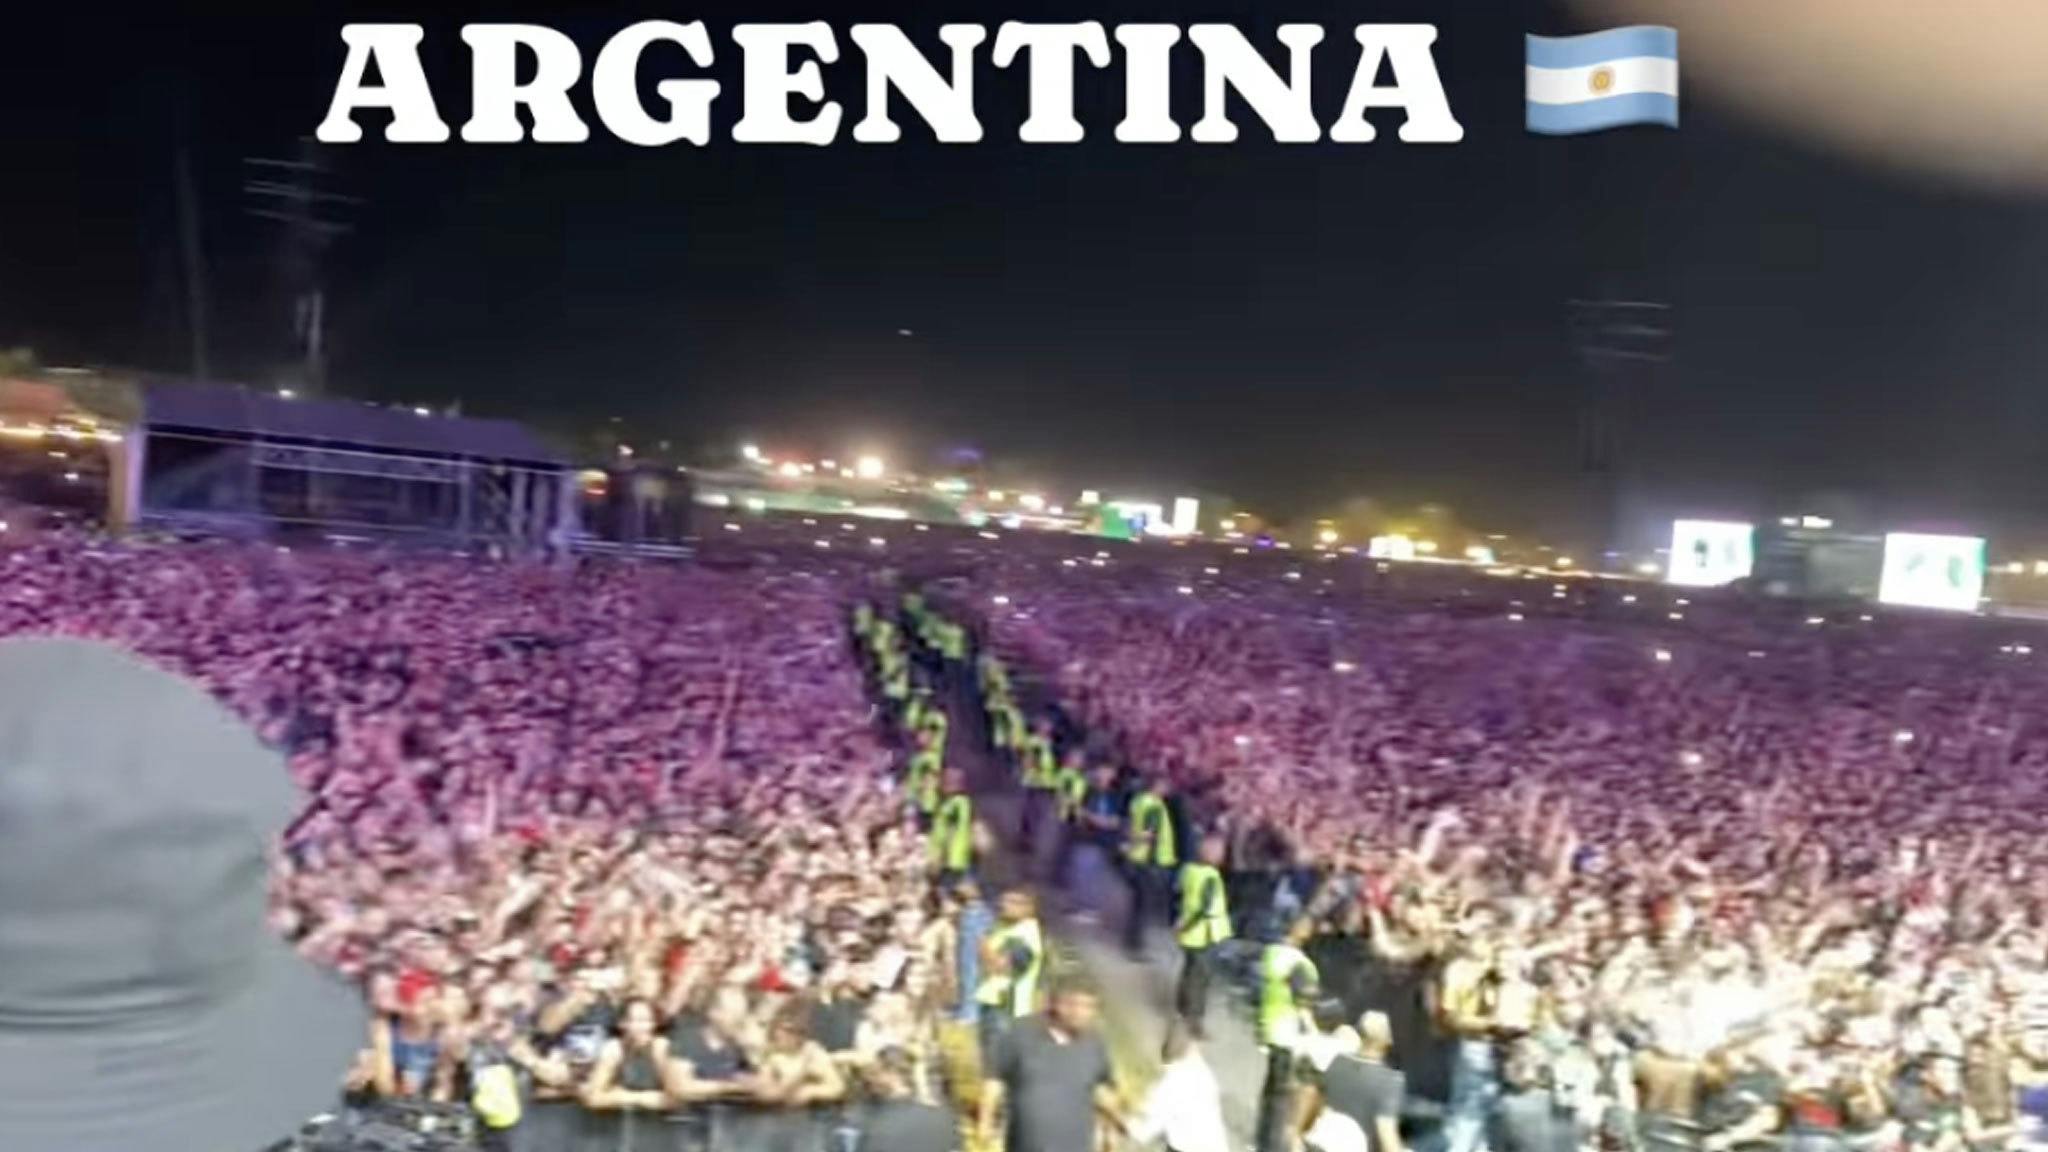 Limp Bizkit share incredible footage of 100,000 fans going wild to Break Stuff in Argentina